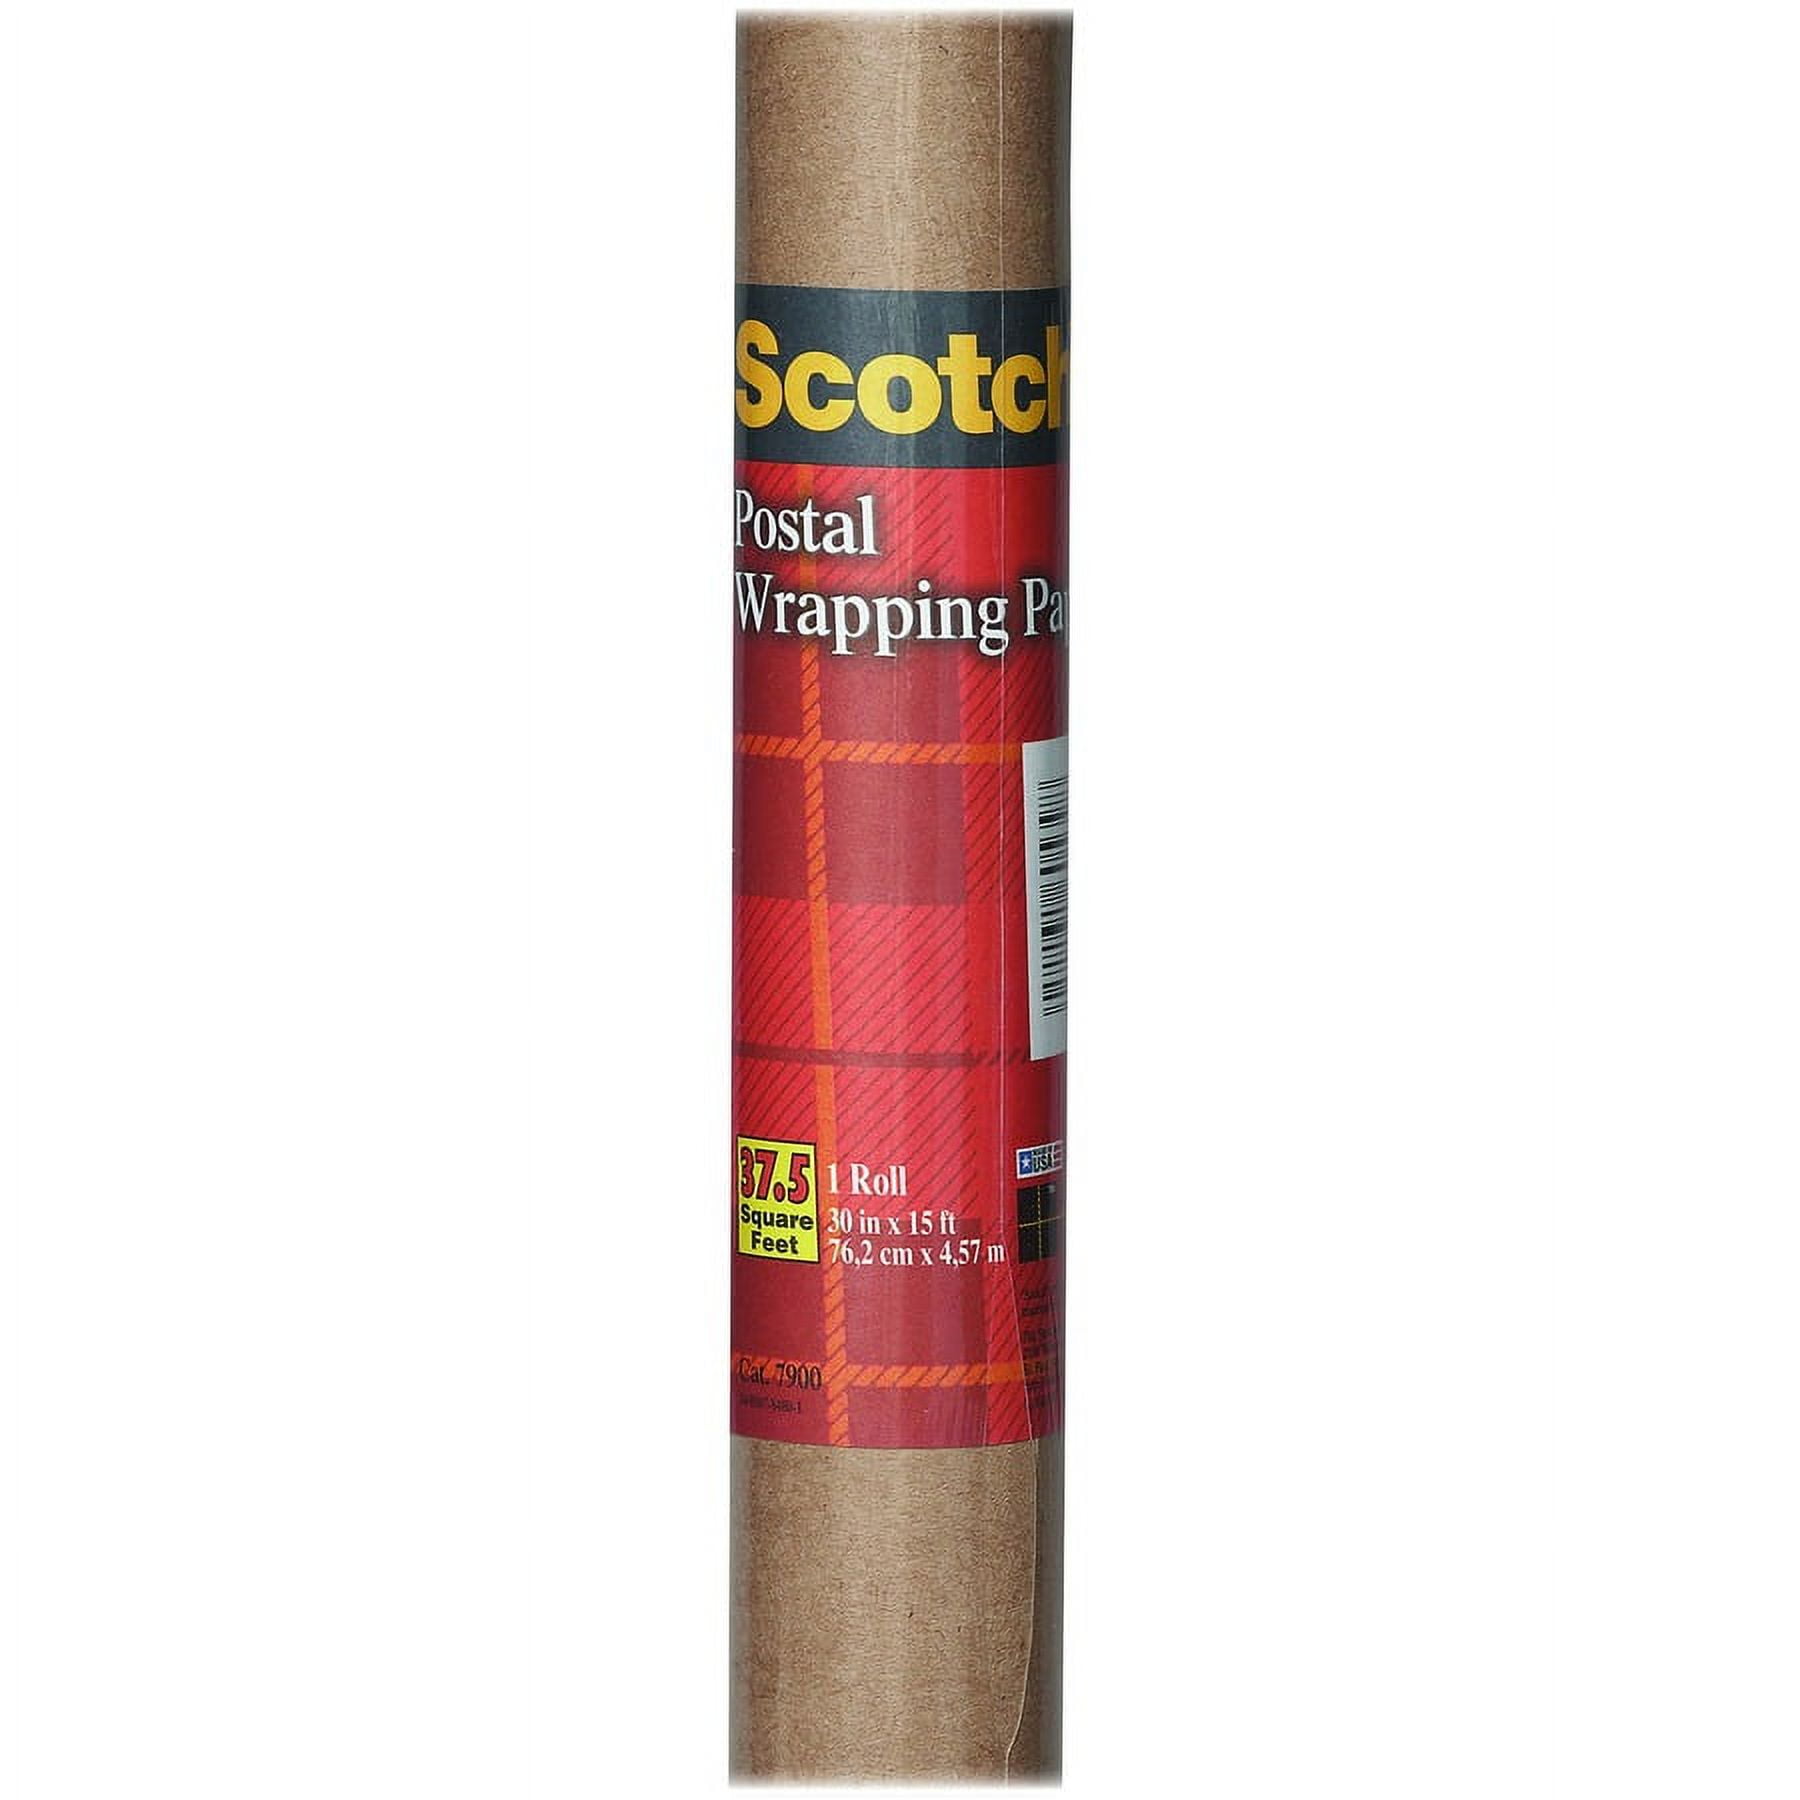 Printing wrapping paper 60 gm, plain opaque paper, size 33 by 48 cm - 30  sheets assorted